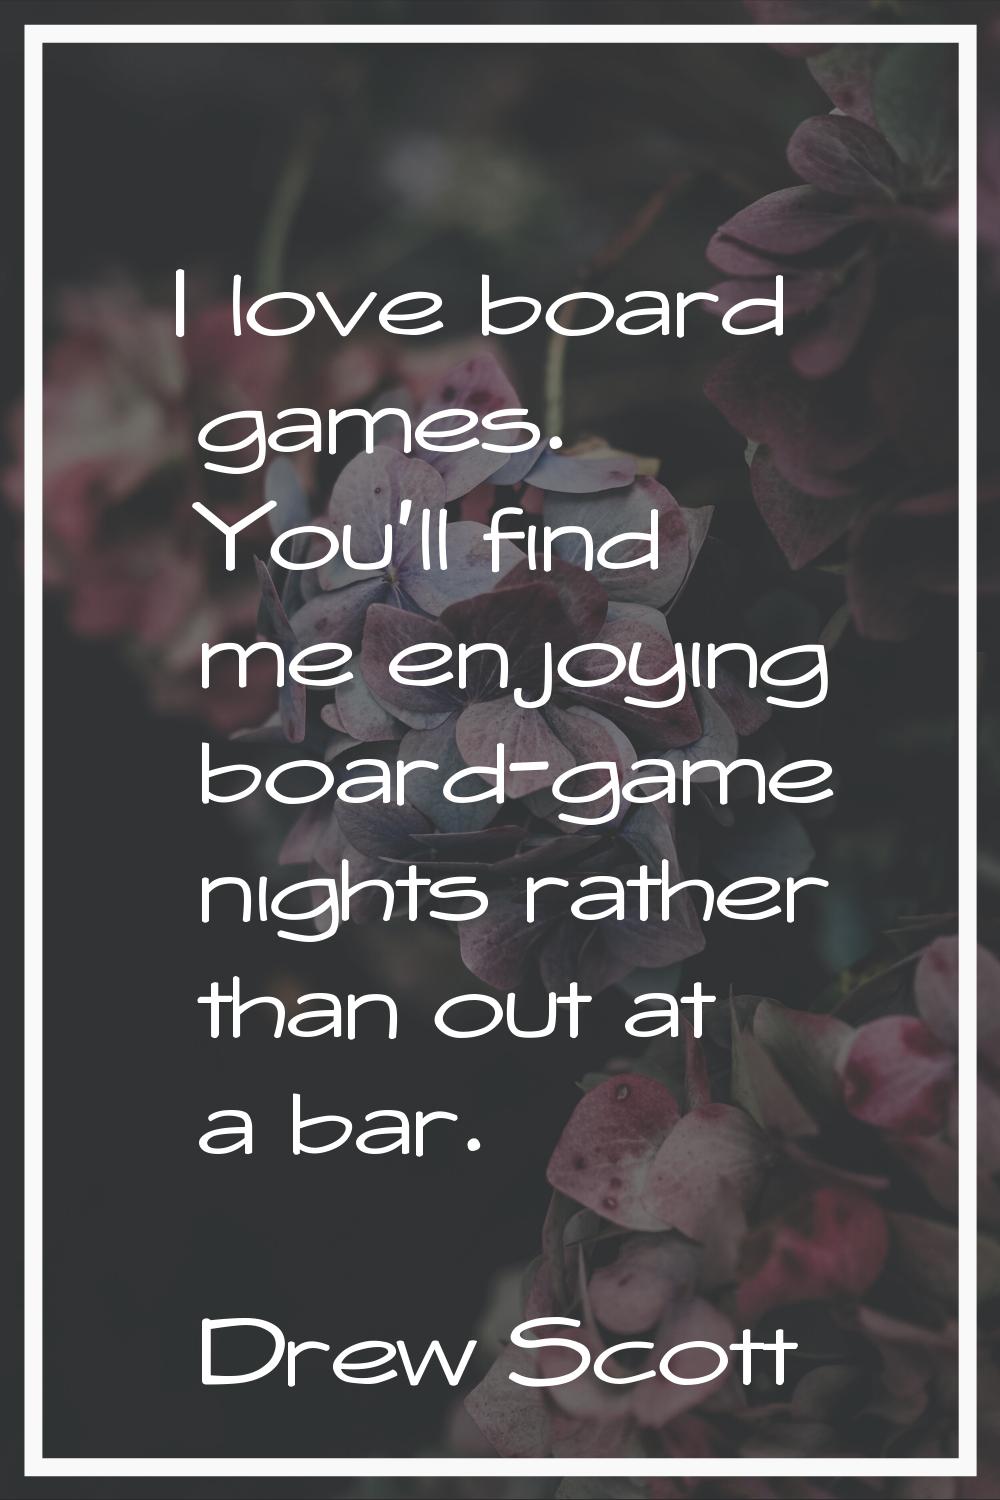 I love board games. You'll find me enjoying board-game nights rather than out at a bar.